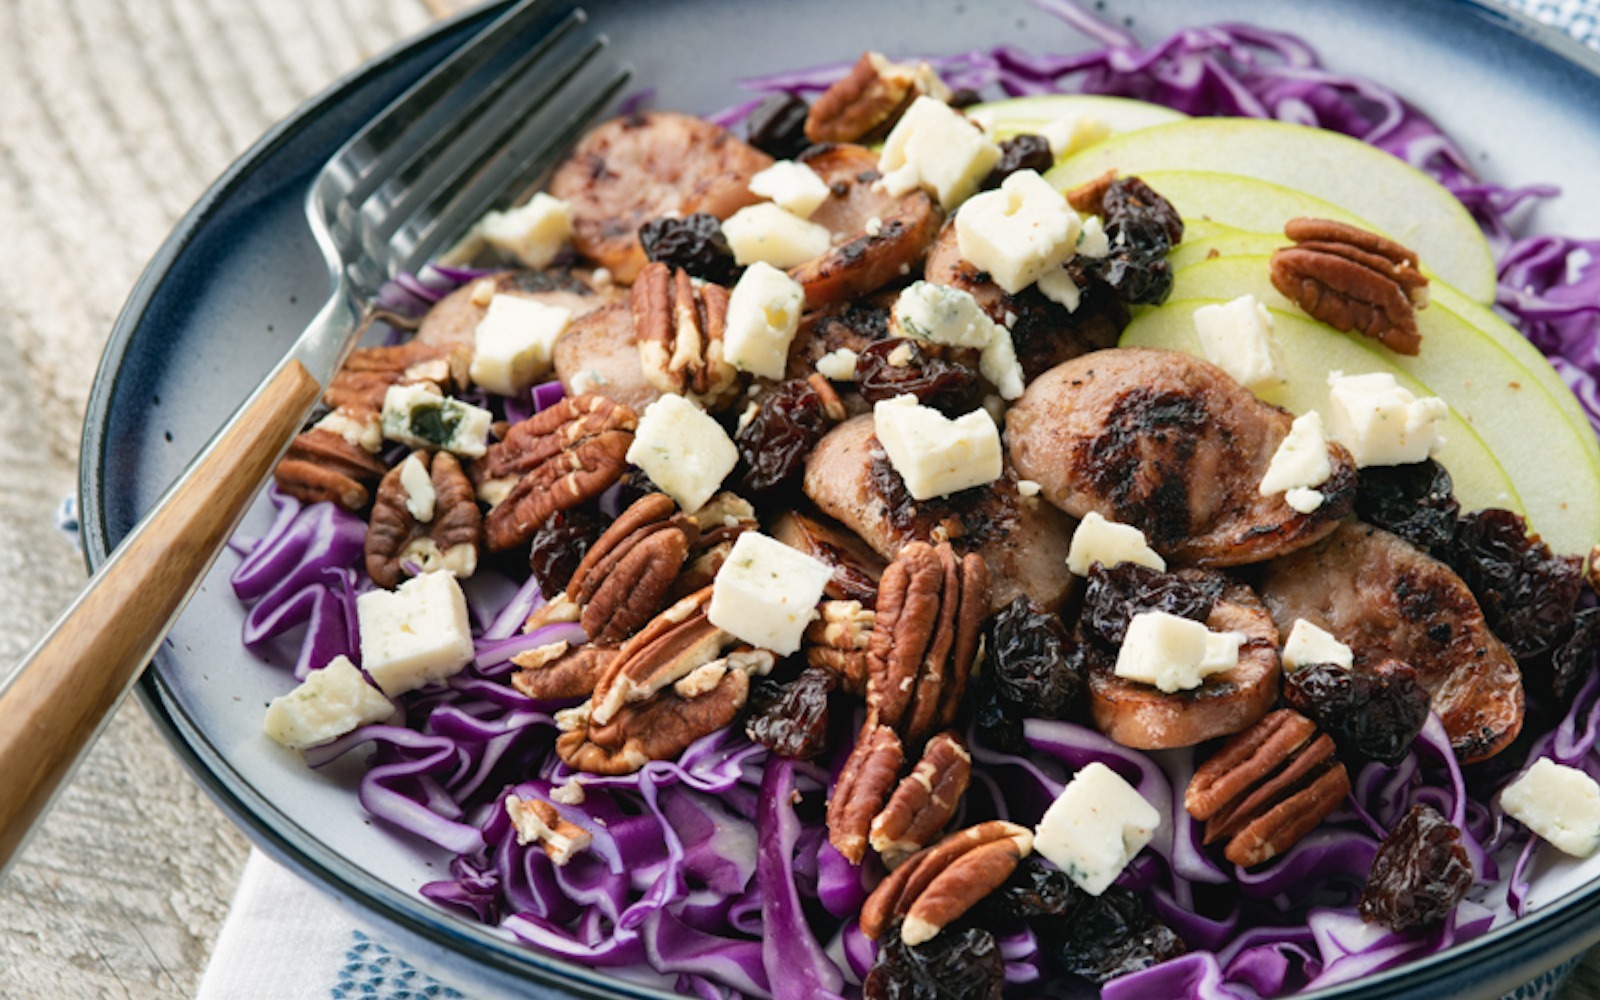 Red cabbage, sausage and apple salad with gorgonzola